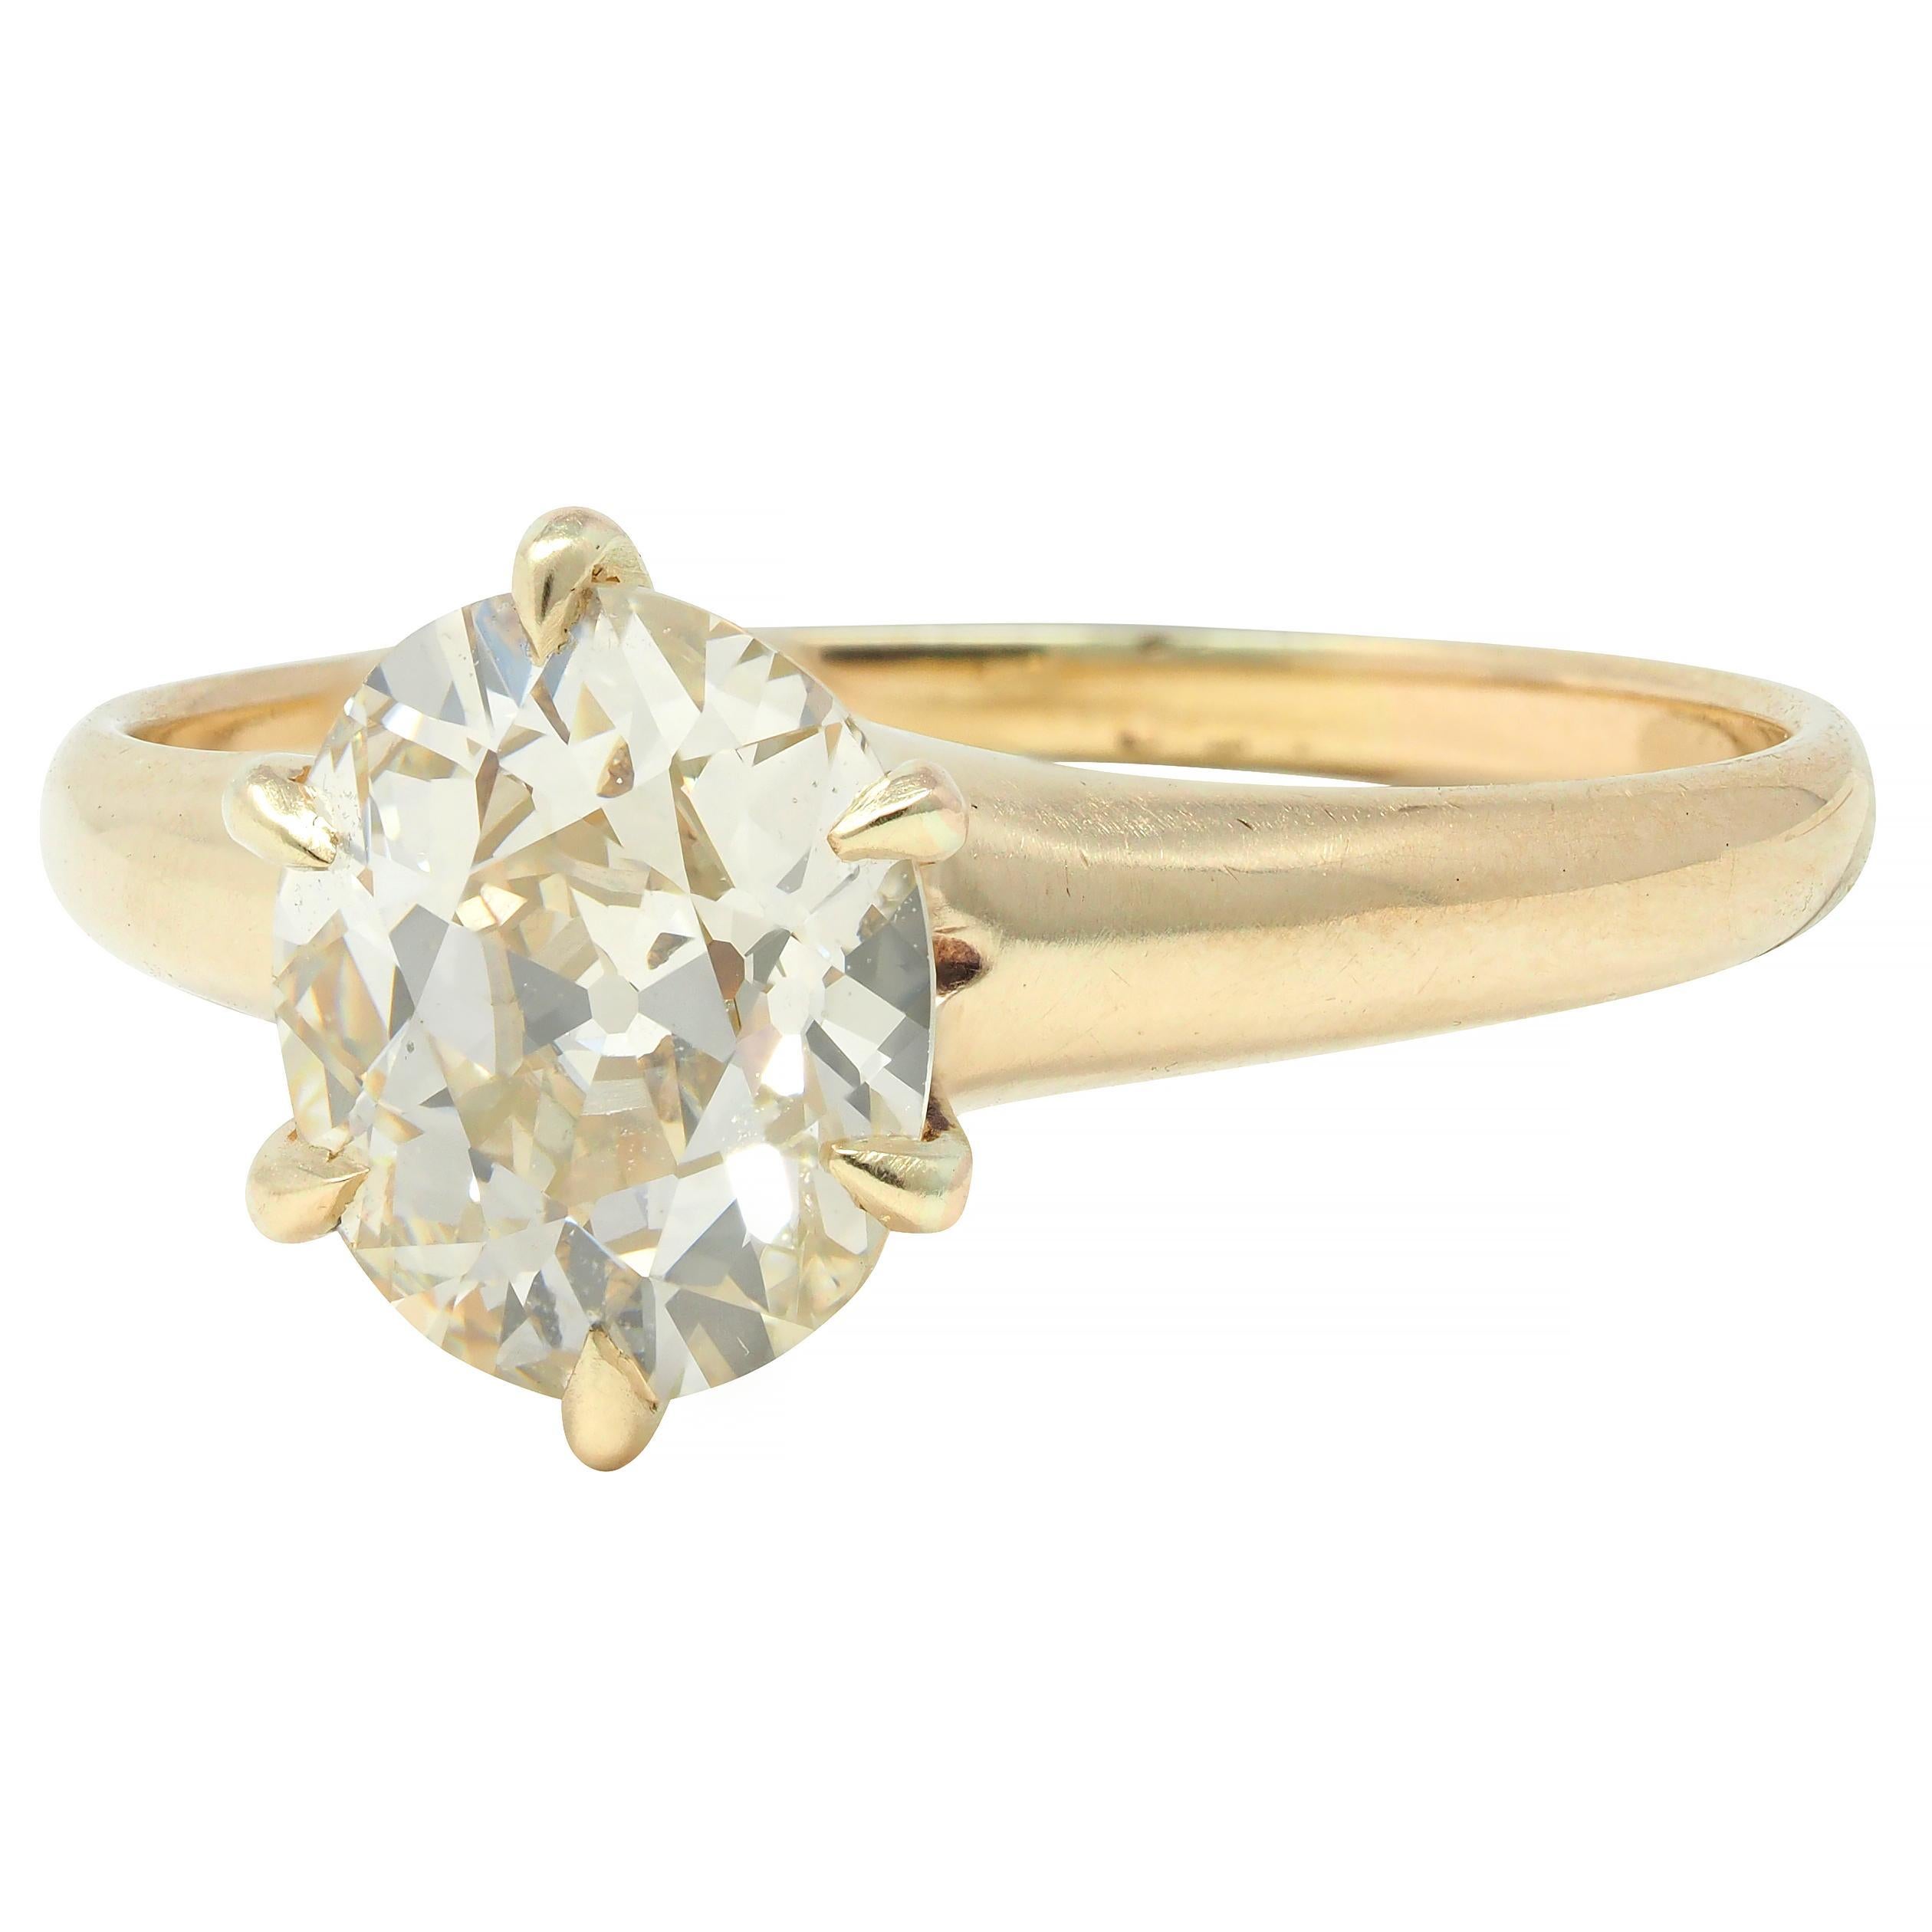 Victorian 1.41 CTW Old Mine Cut Diamond 14 Karat Gold Solitaire Engagement Ring For Sale 3